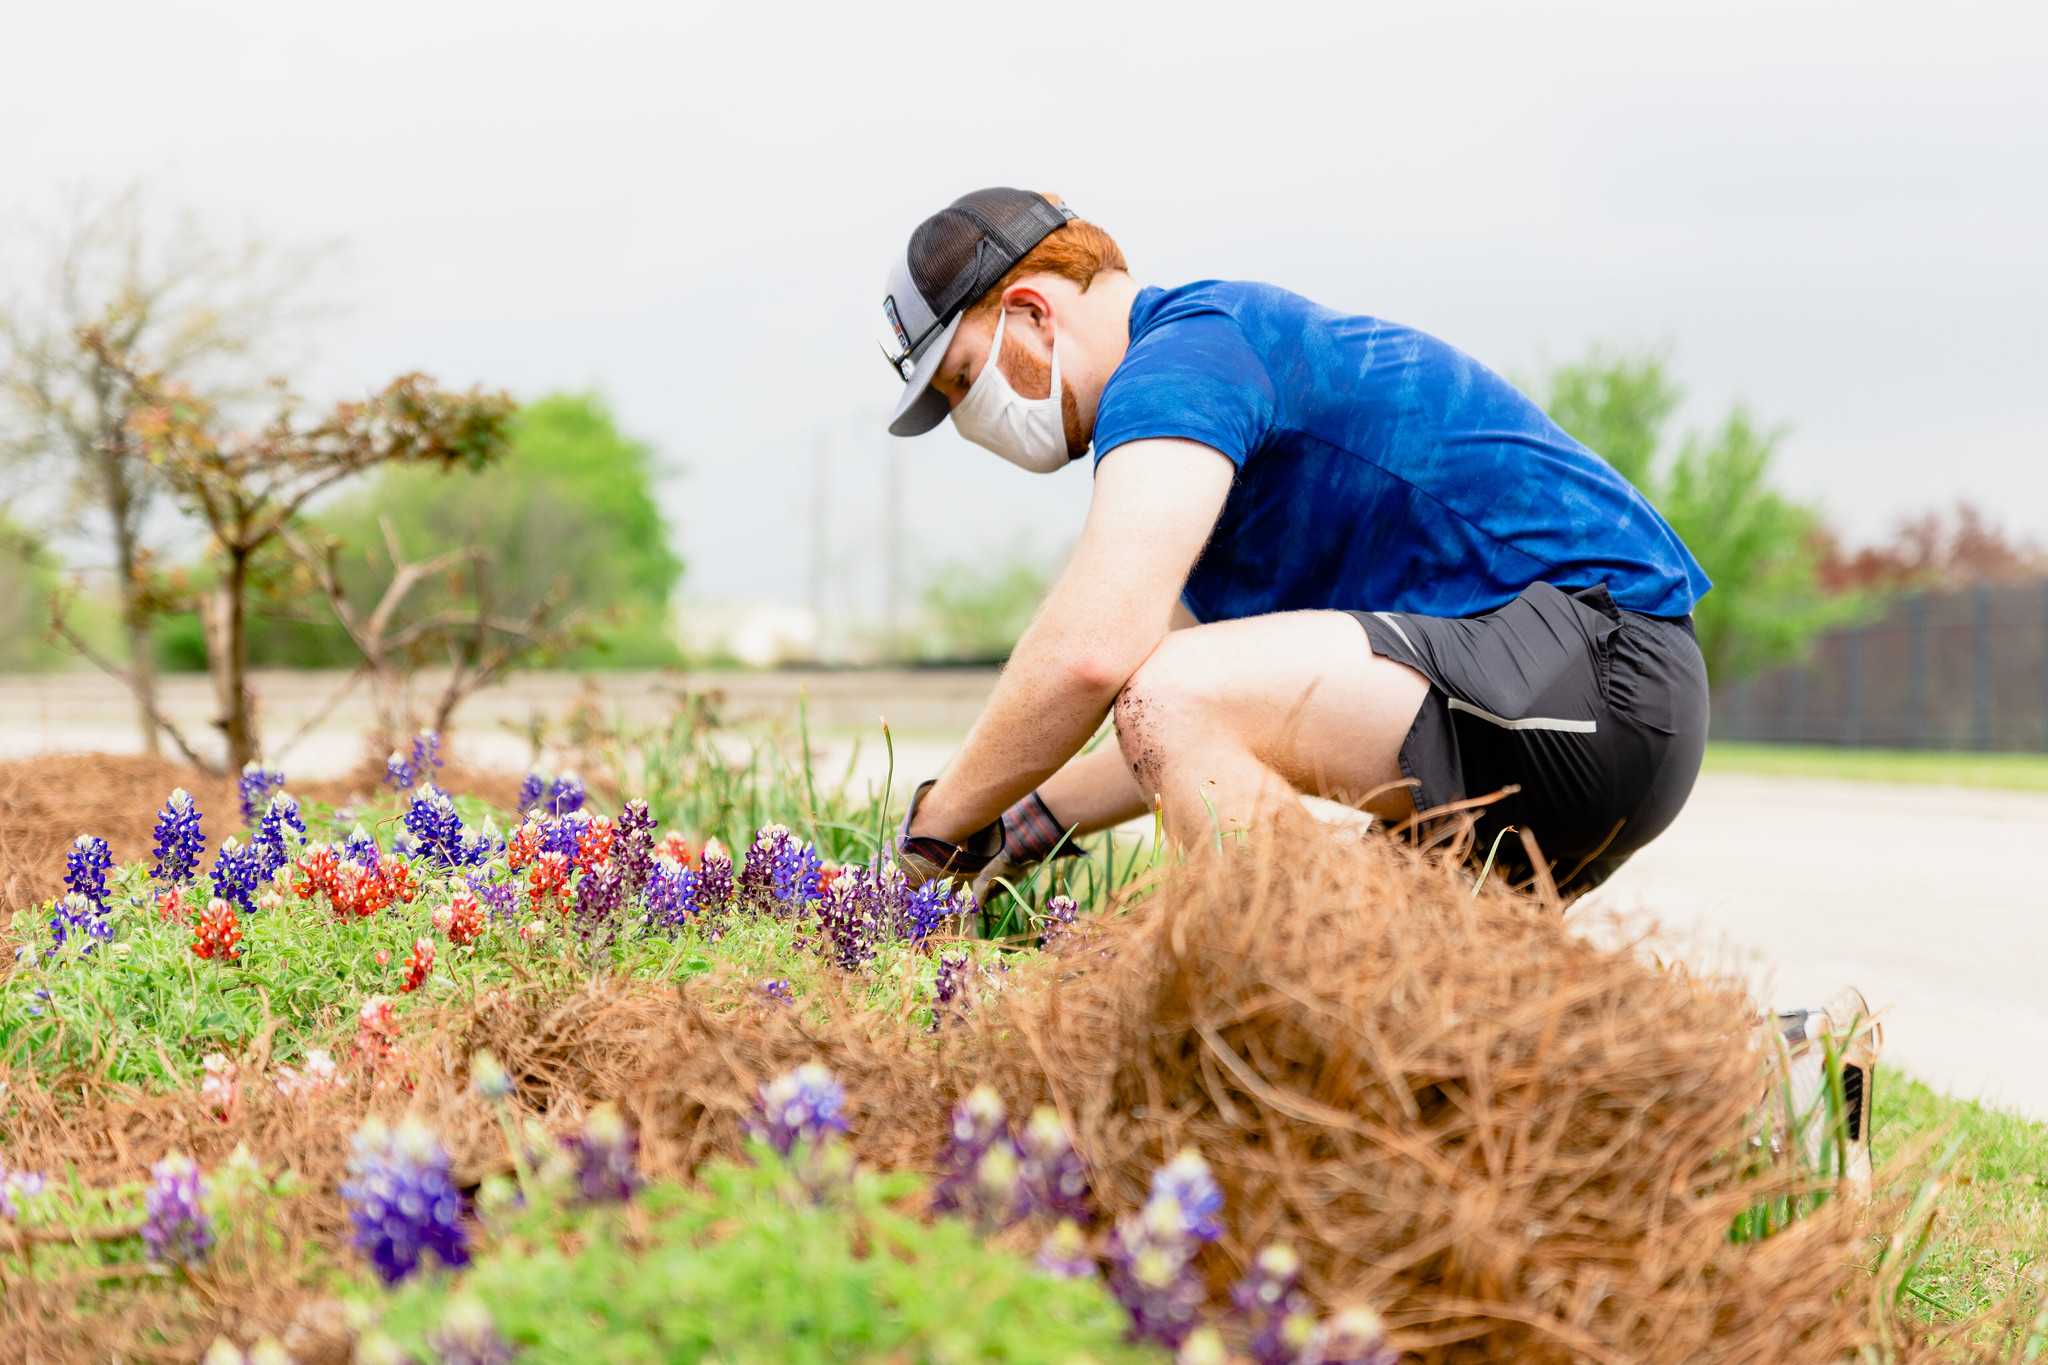 Image of a student wearing a cap and face mask kneeling down and tending to a bluebonnet field.